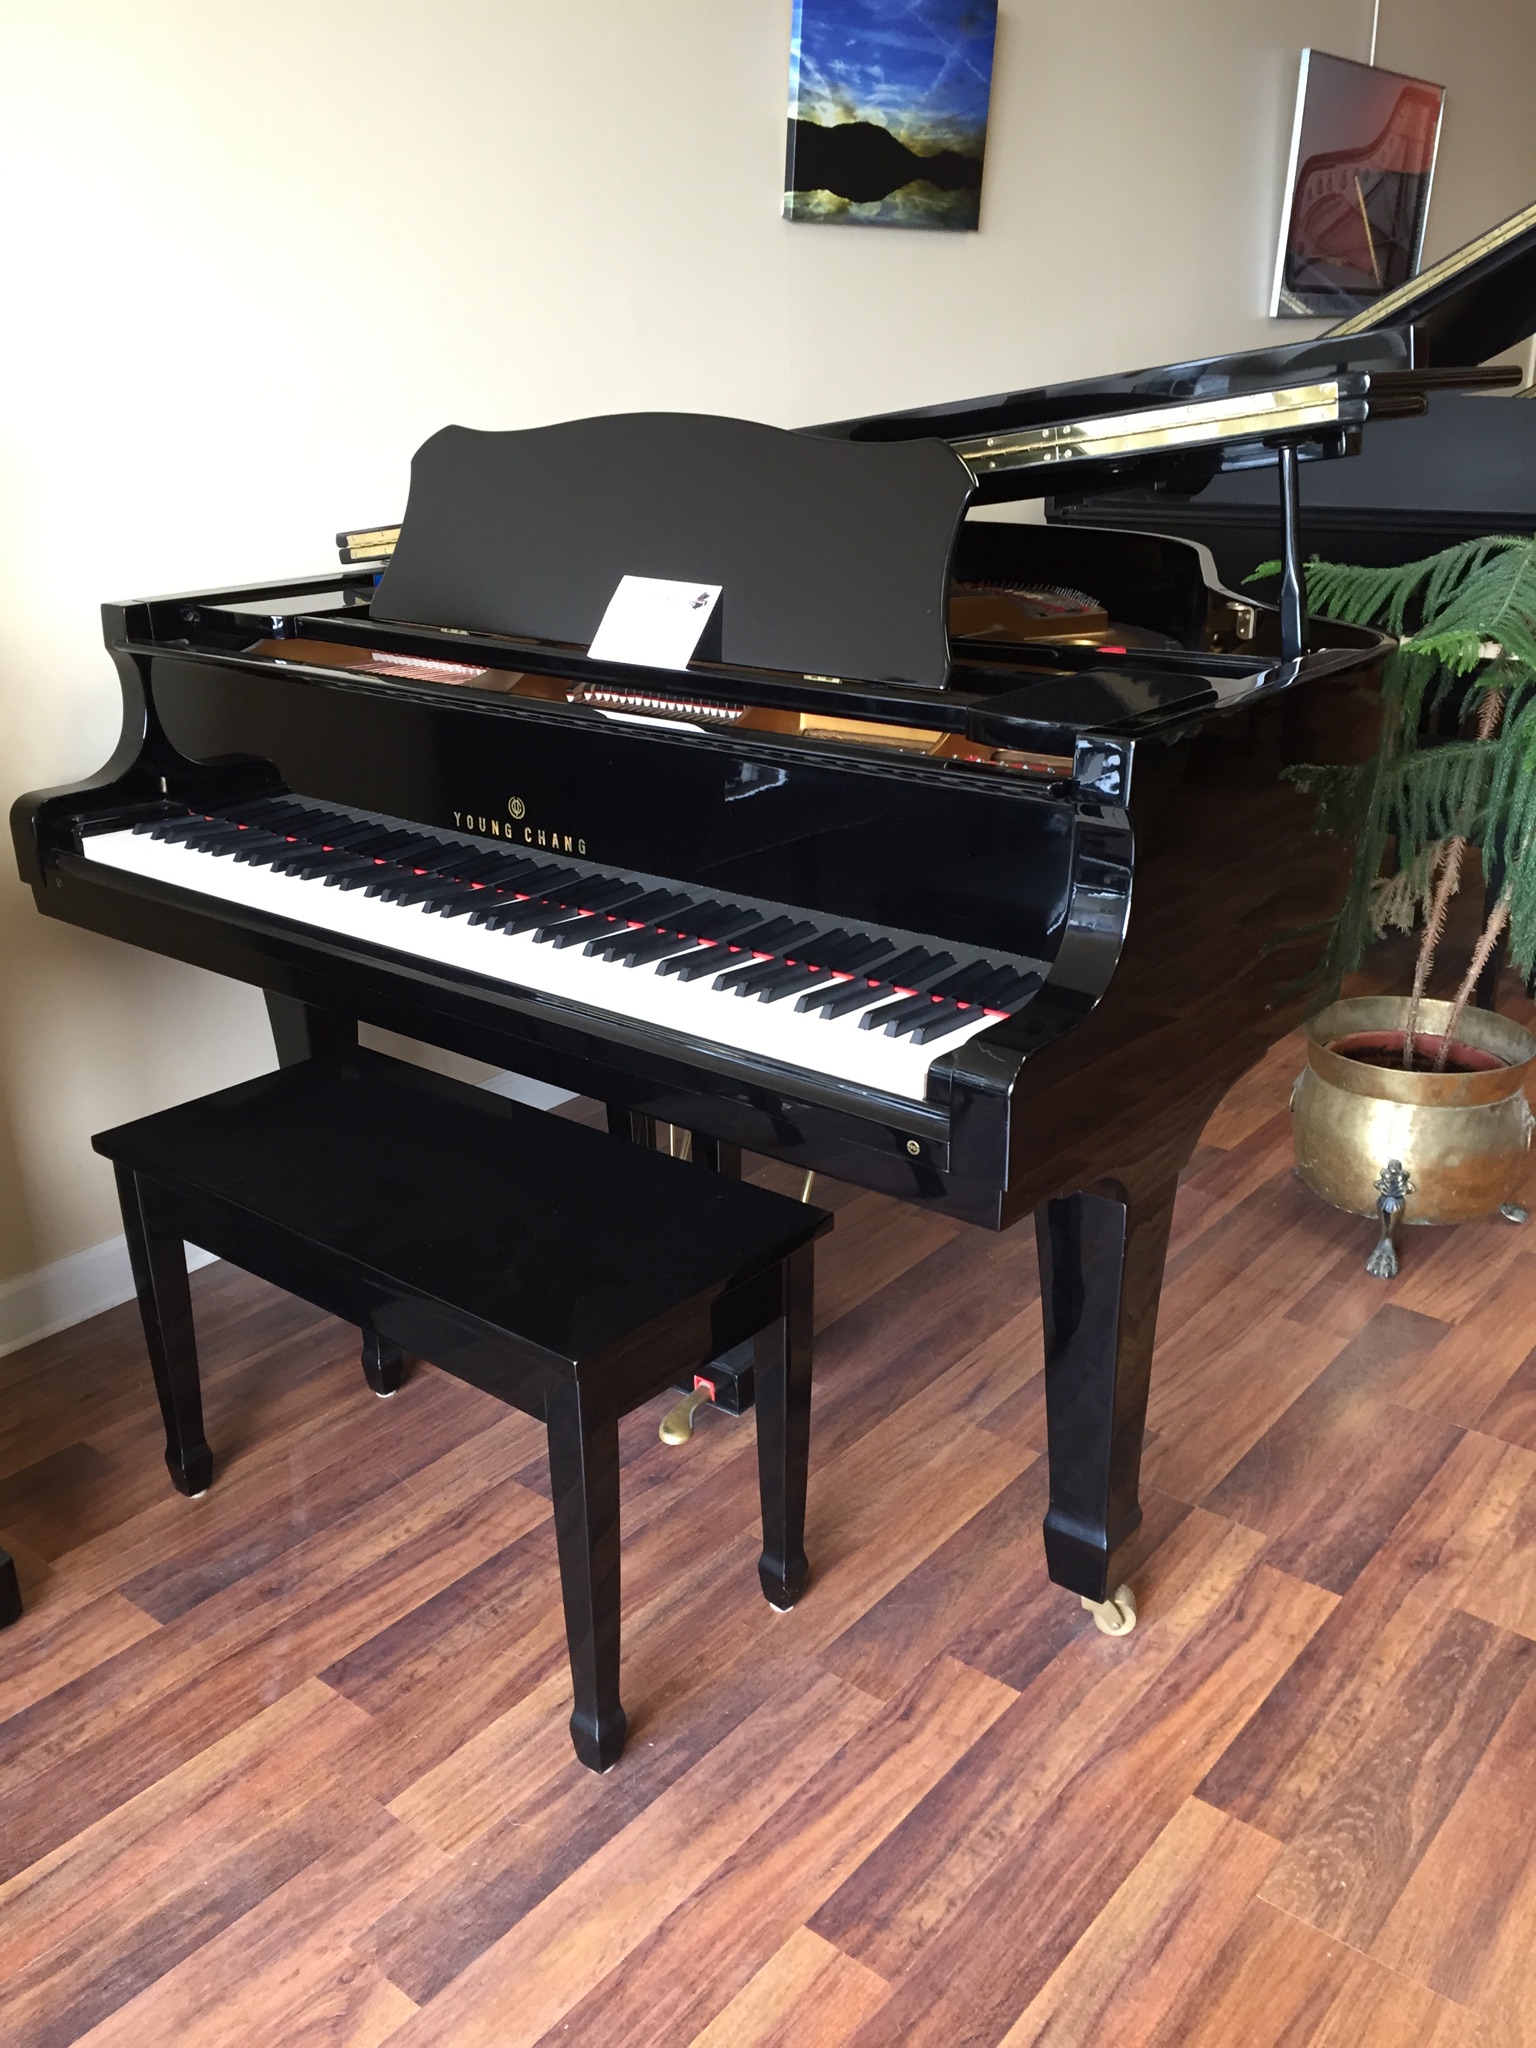 Schedule A Piano Tuning Today!